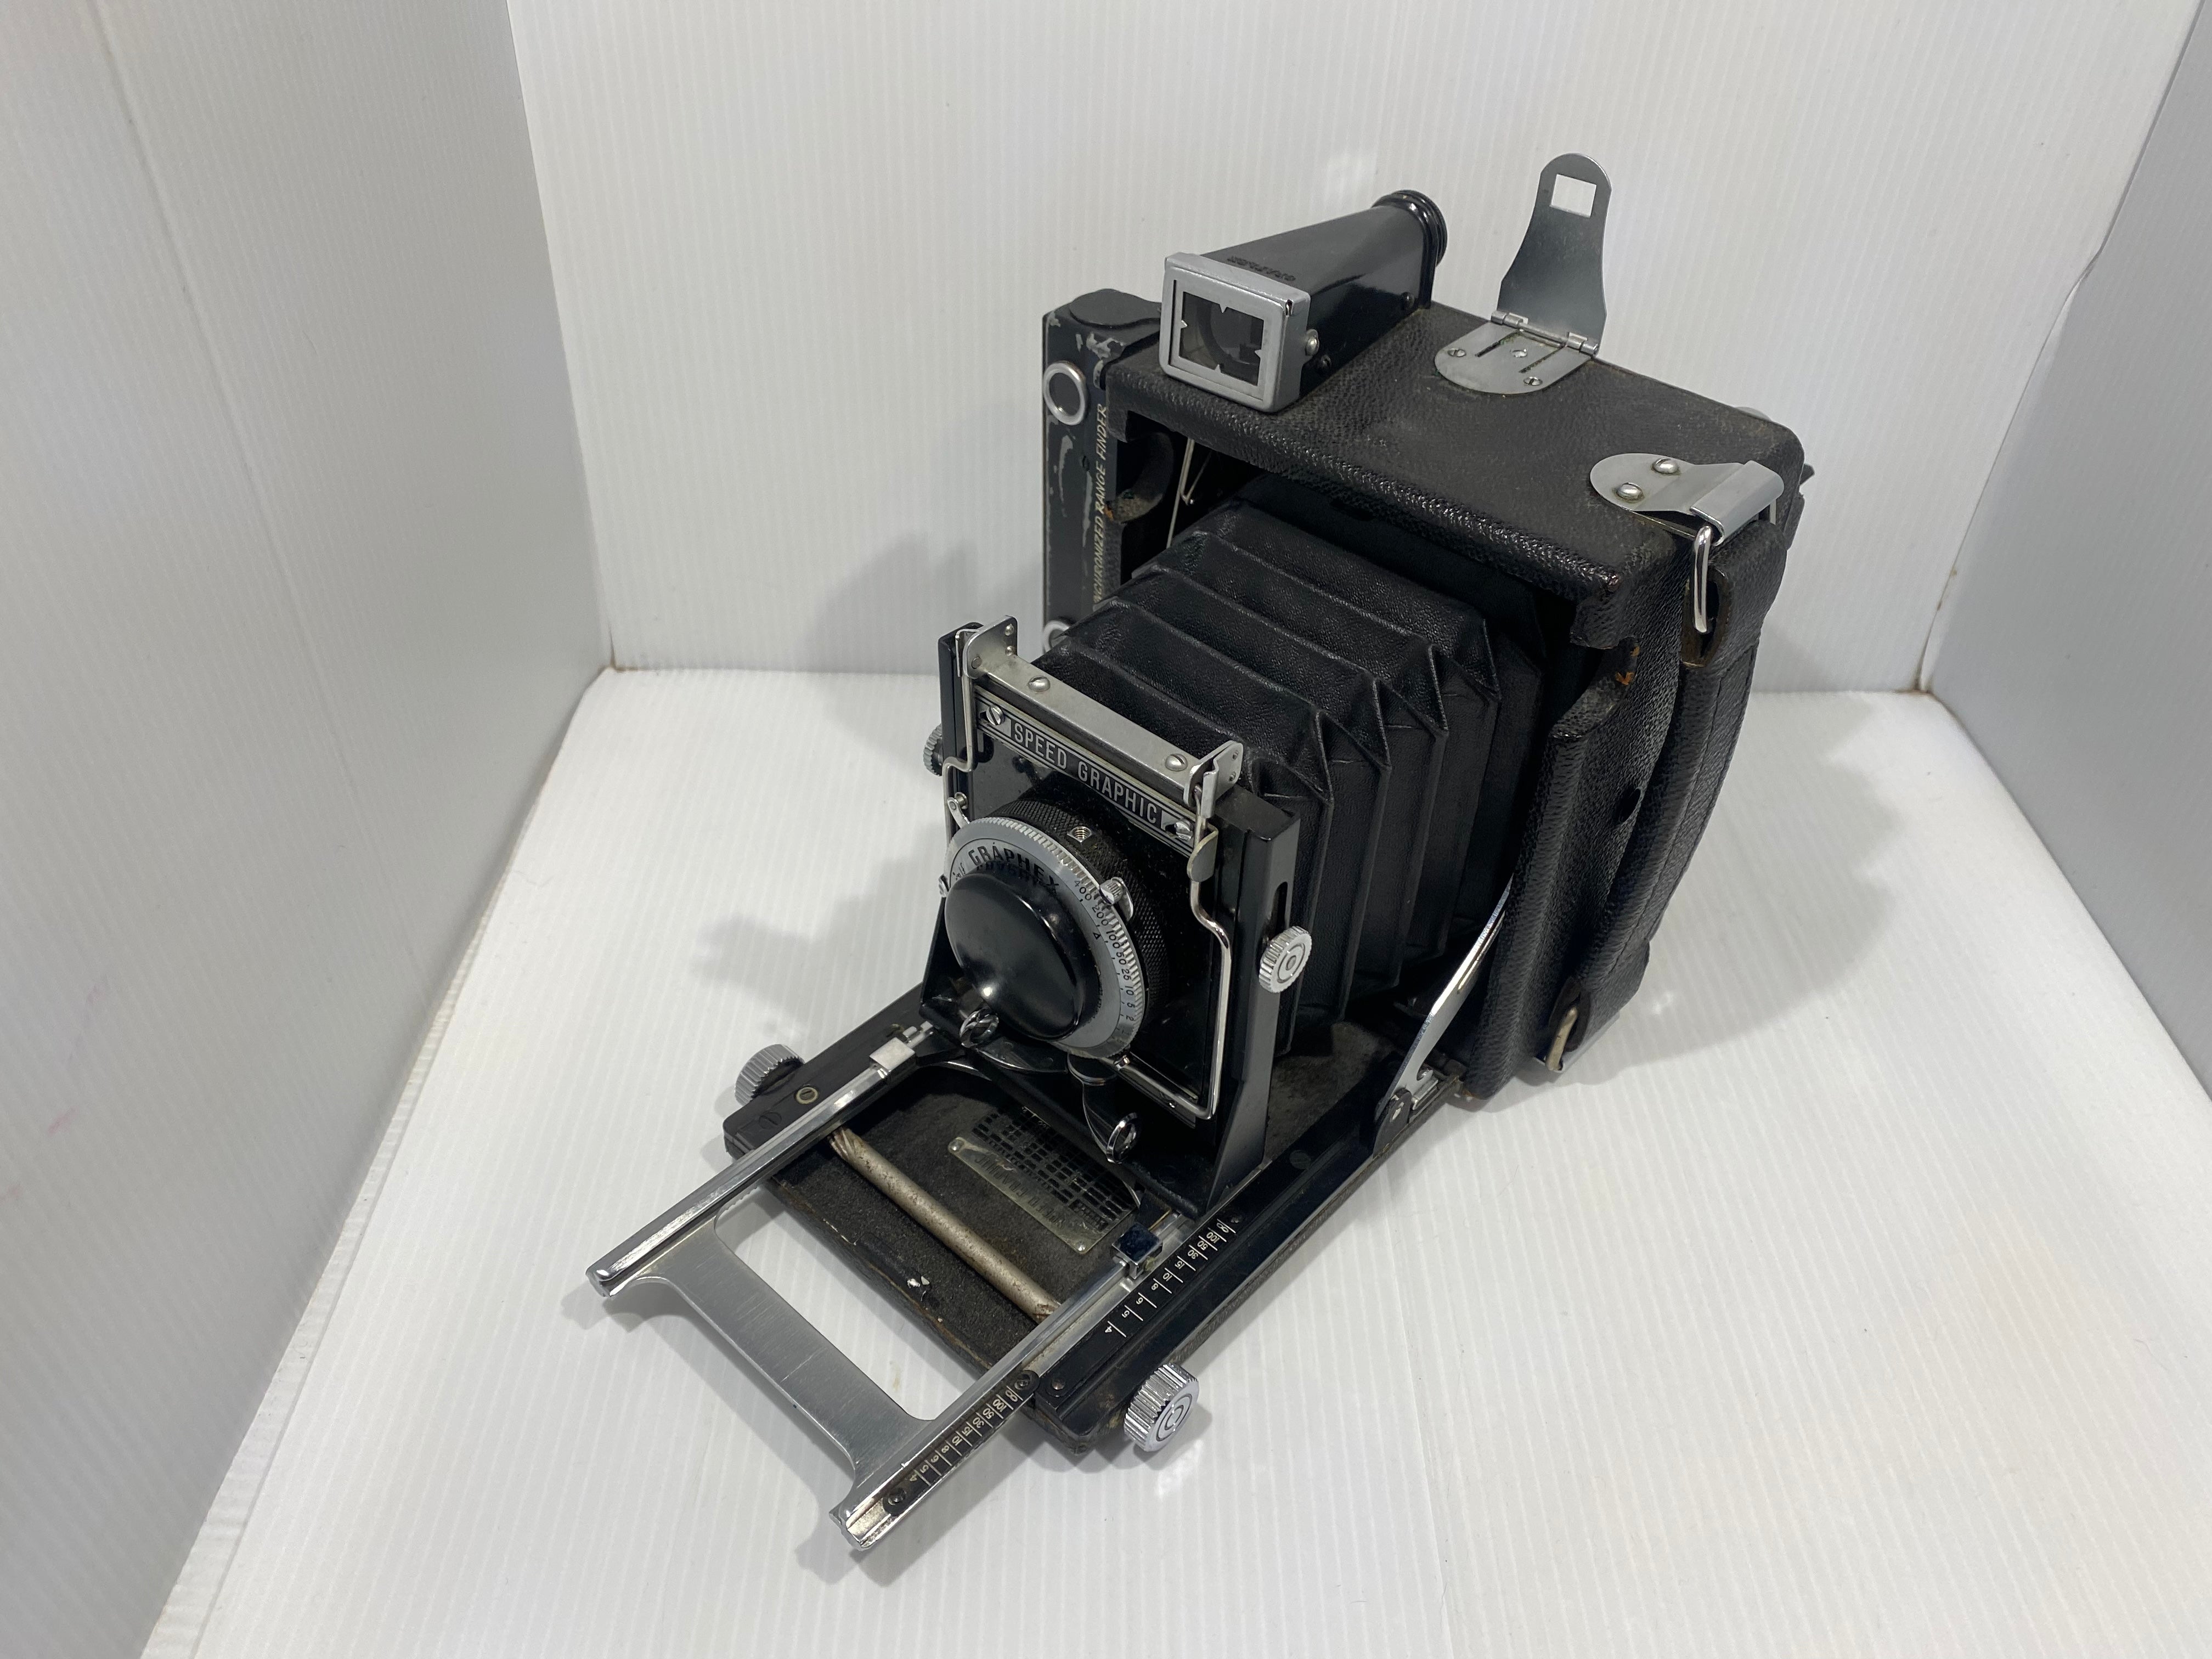 Antique Speed Graphic Folding Camera. Made by Folmer Graflex Corp., Rochester, NY 1928-1939.